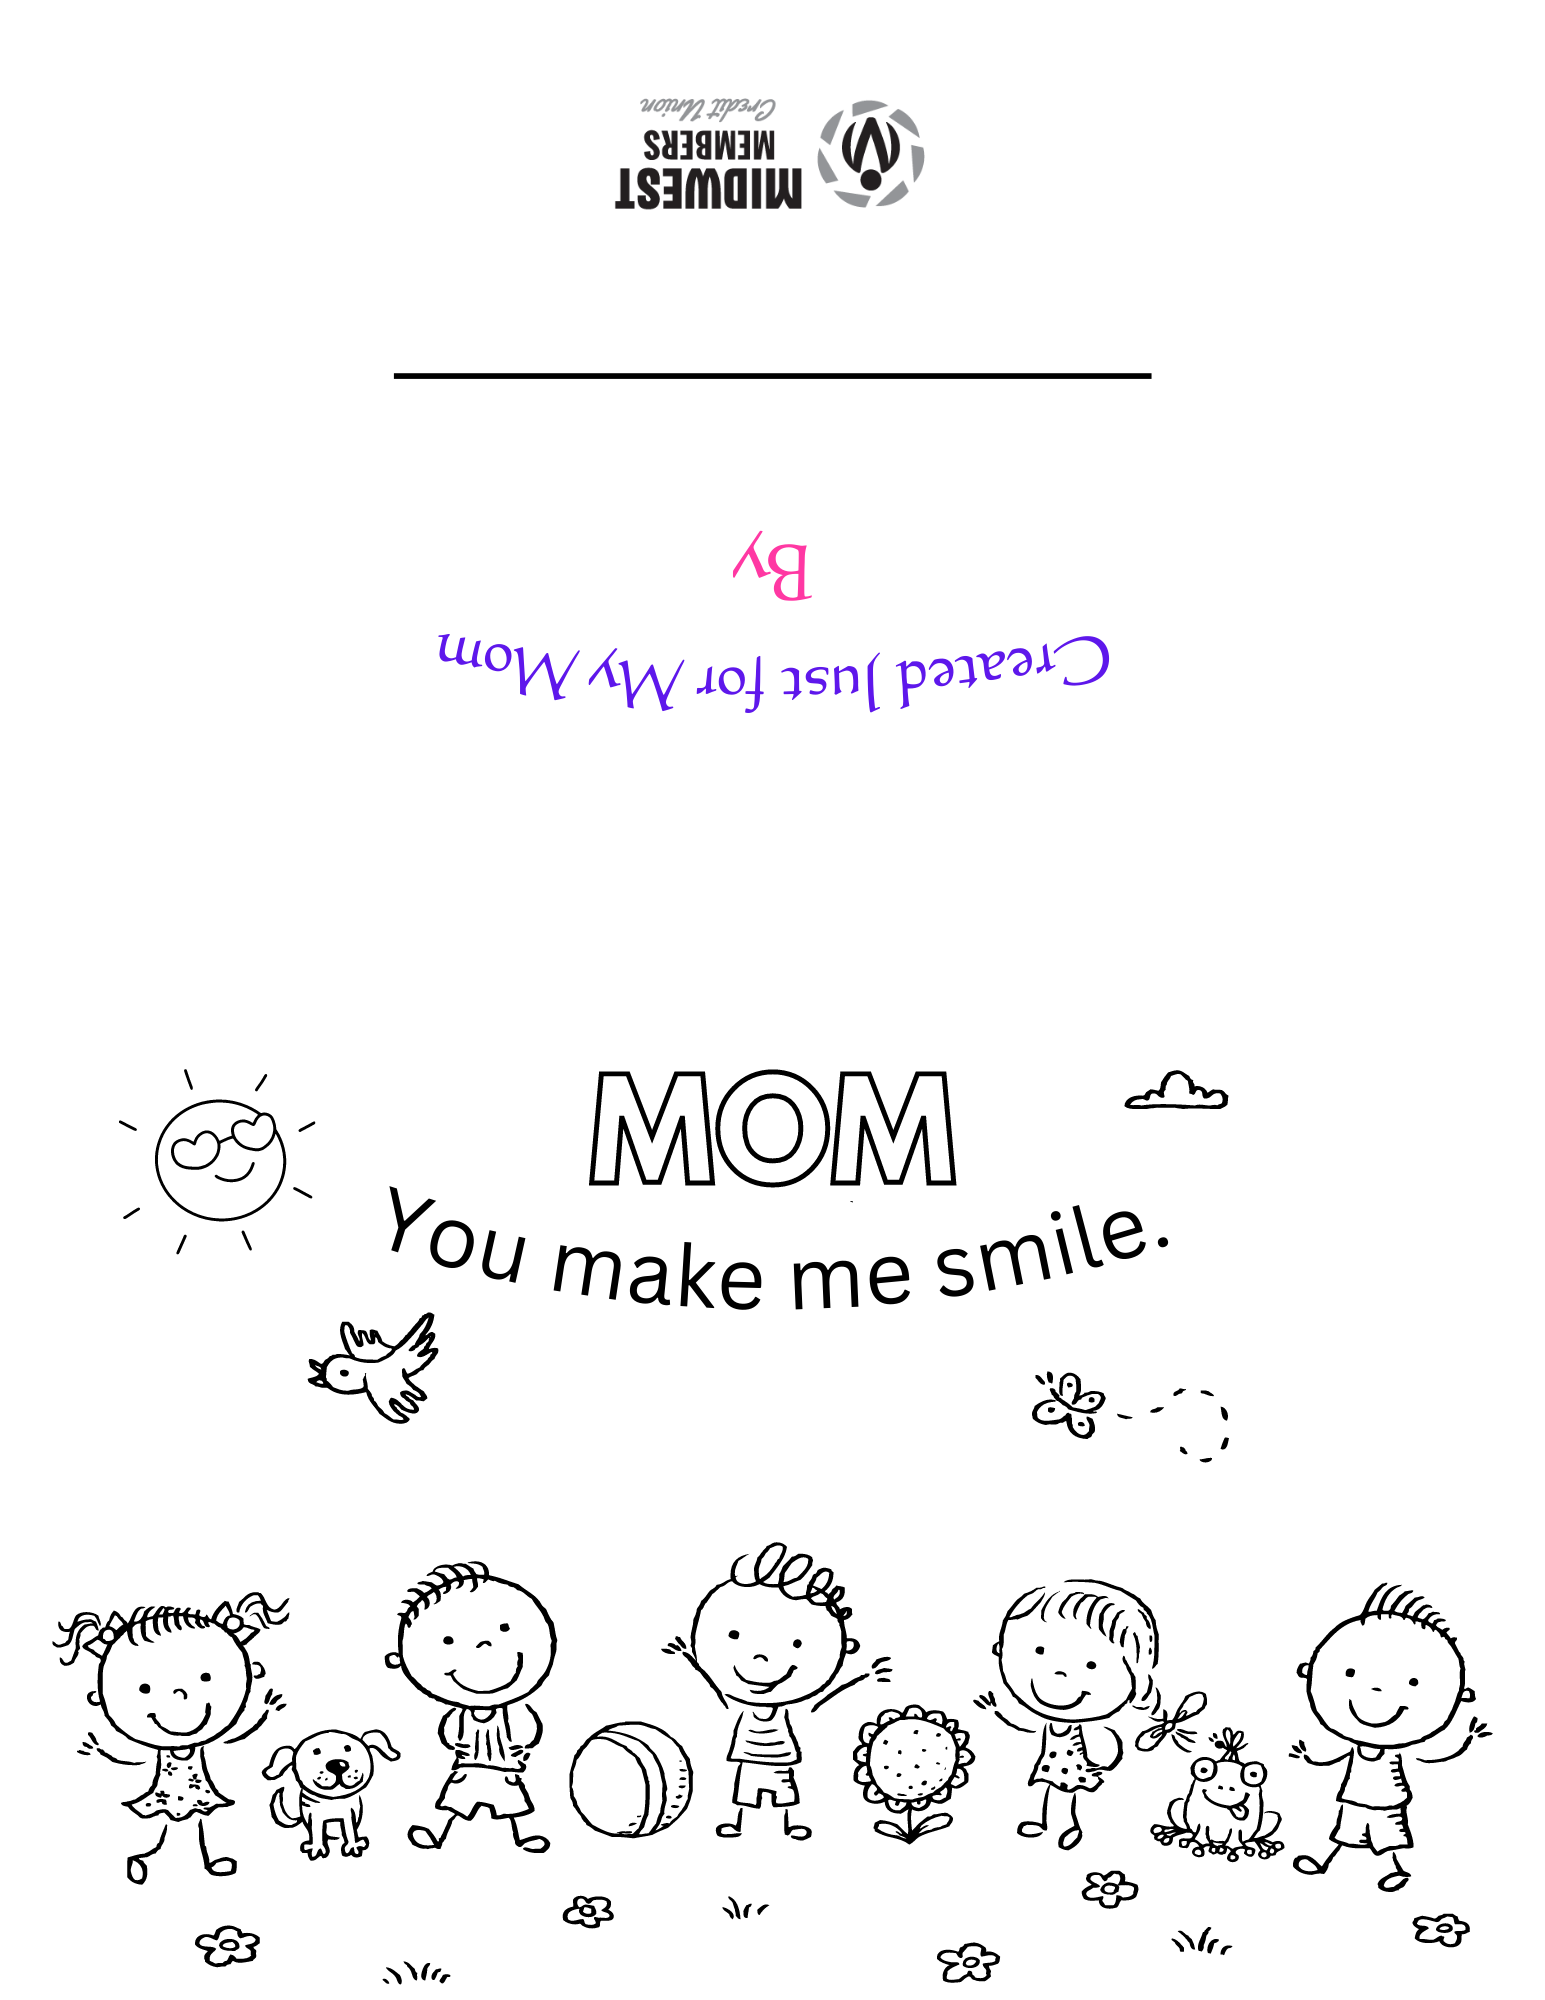 Coloring picture of kids - Mom you make me smile